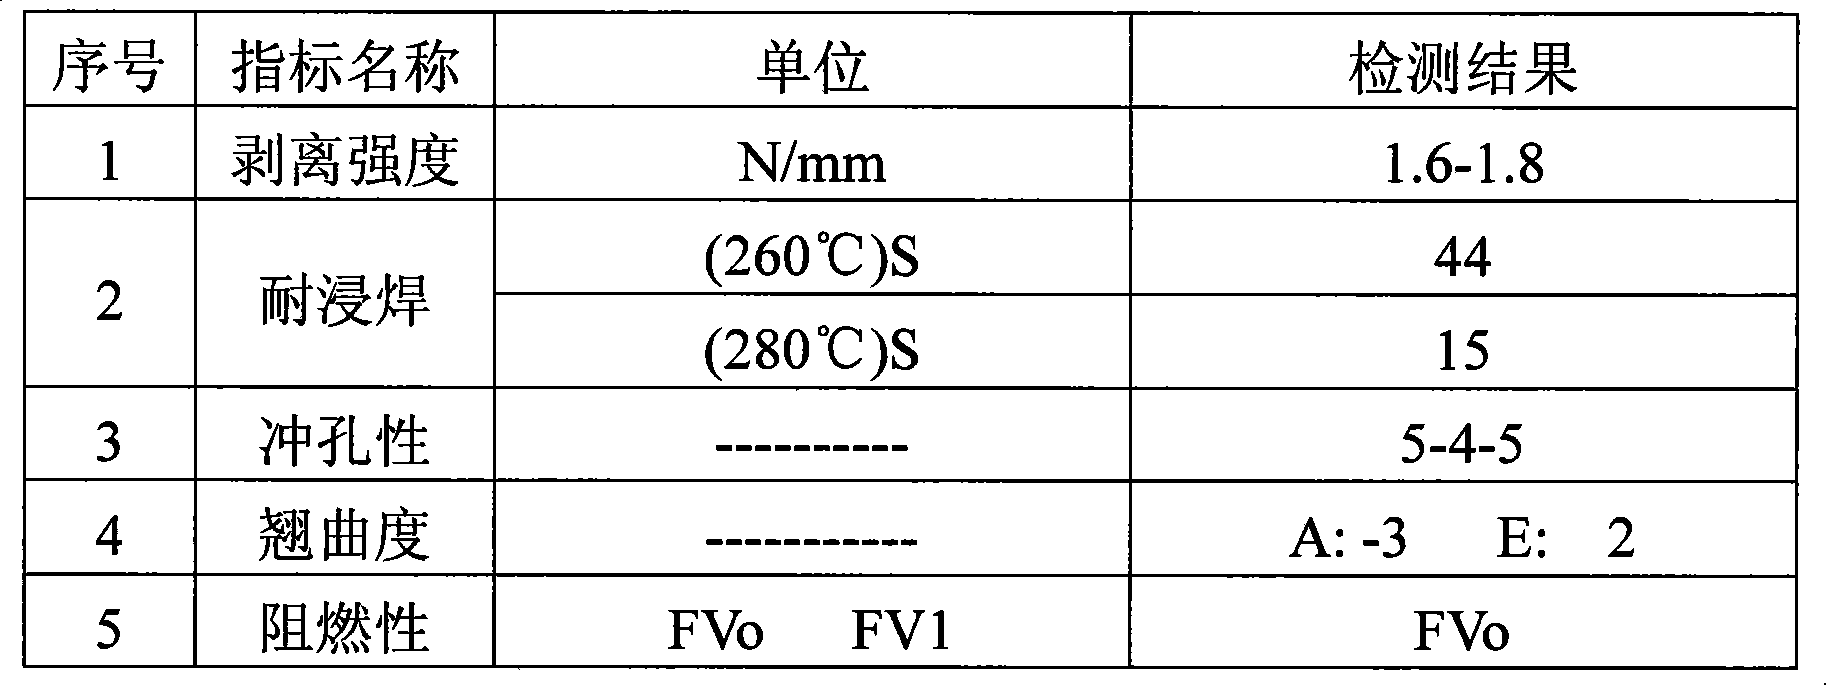 Method of resin composition for producing environmental friendly highly-durable dip welding flame-resistant paper-based copper-coated board